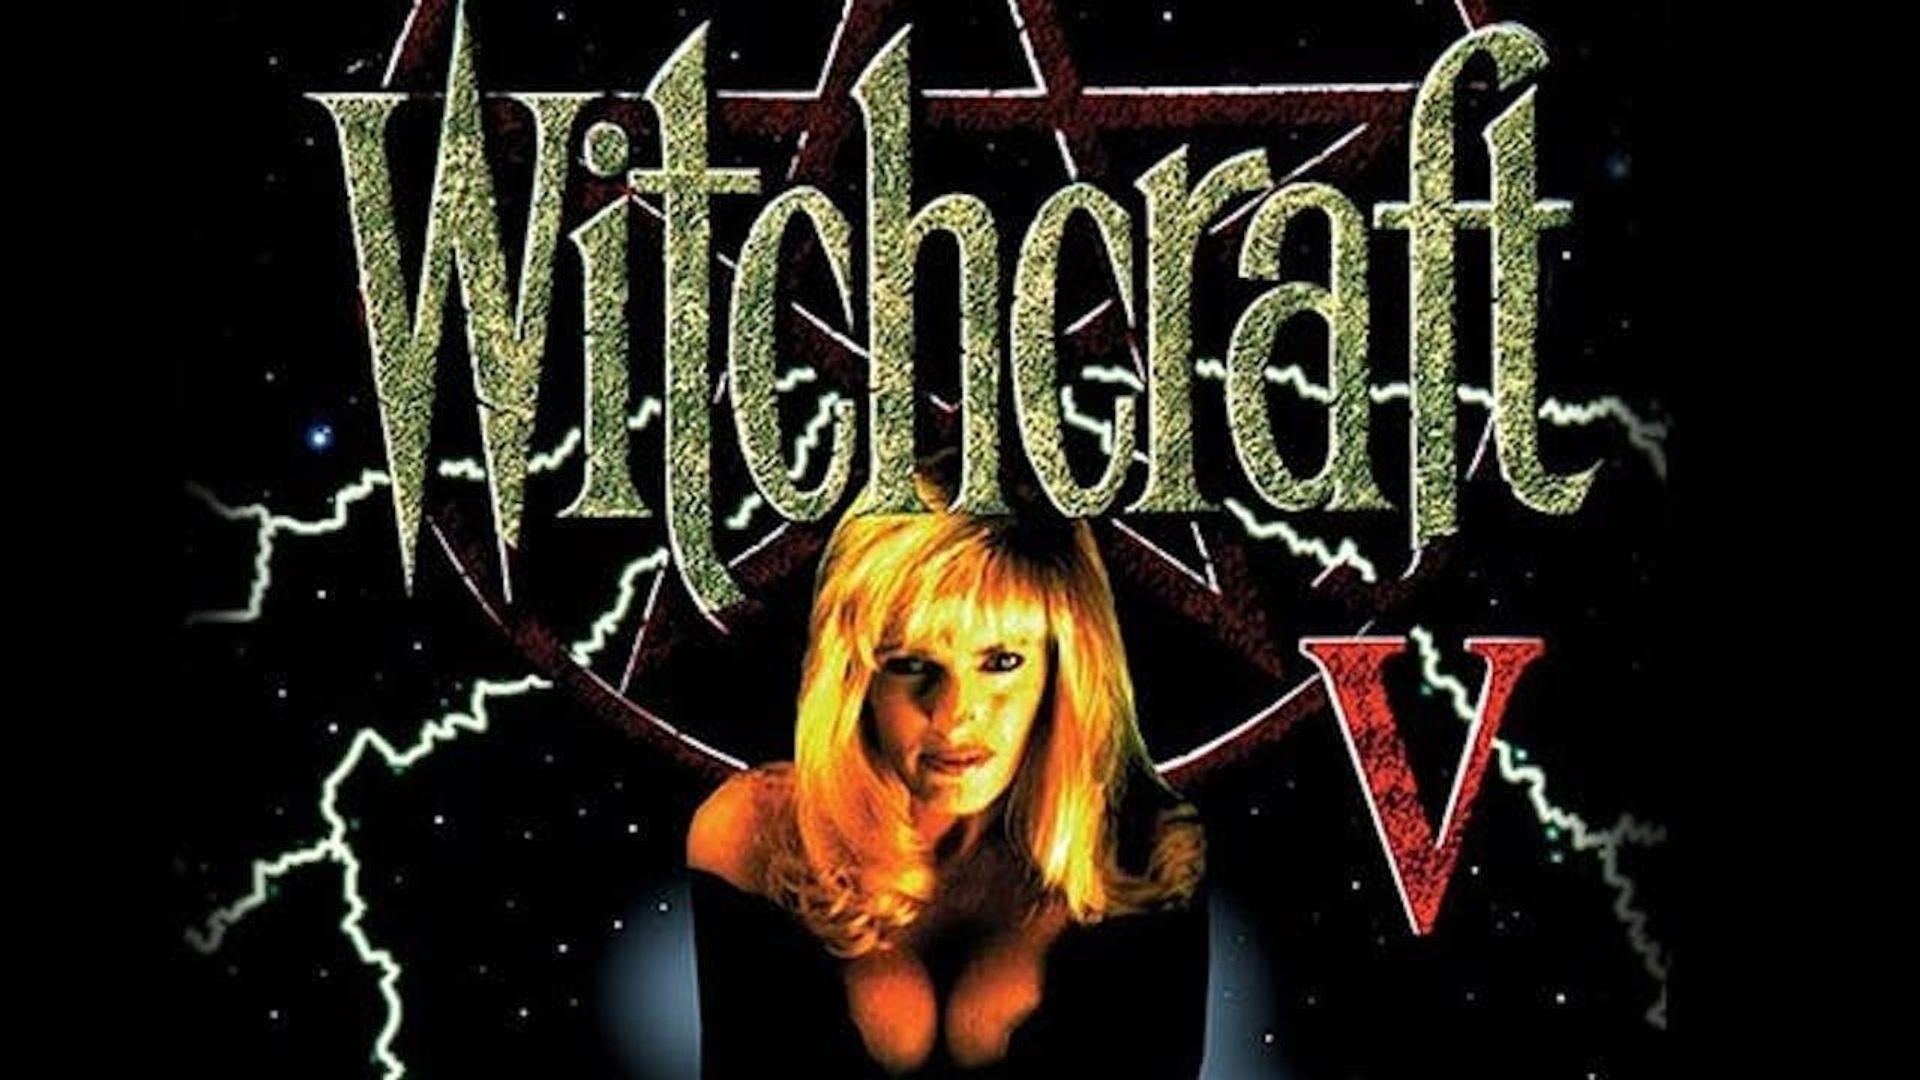 Witchcraft V: Dance with the Devil background